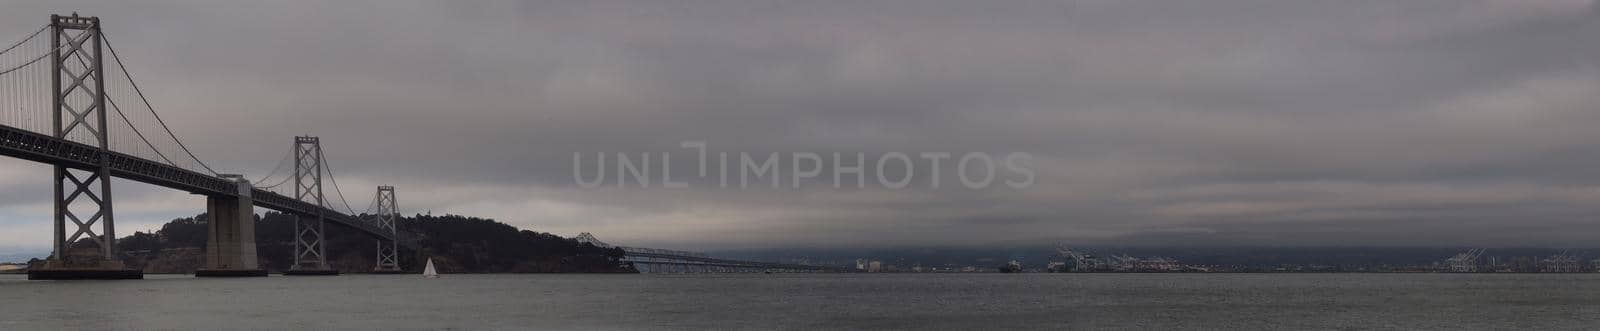 Panoramic of Boat sail by the San Francisco Bay Bridge on a foggy day with Oakland Harbor in the Background.